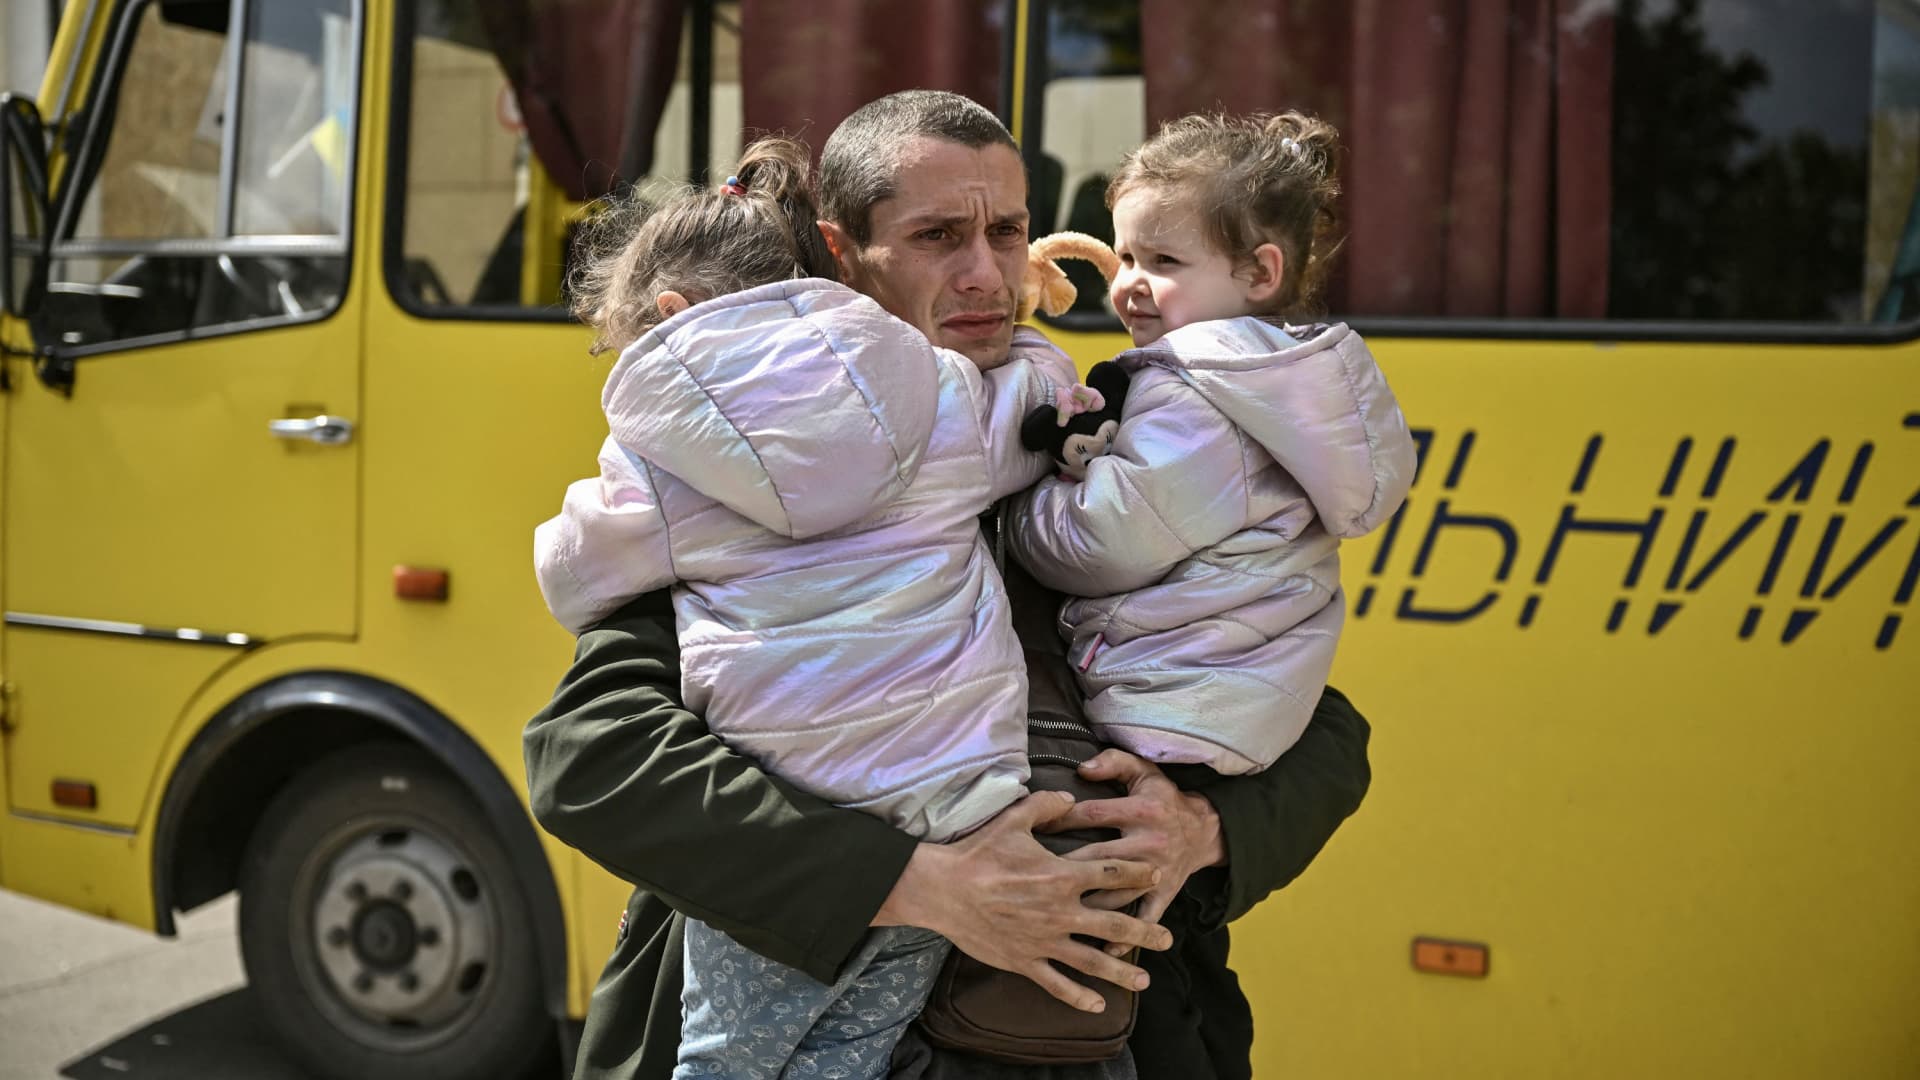 Dmytro Mosur, 32, who lost his wife during shelling in nearby Severodonetsk on May 17, holds his 2-year-old twin daughters as they wait to be evacuated from the city of Lysychansk, eastern Ukraine, on May 20, 2022.